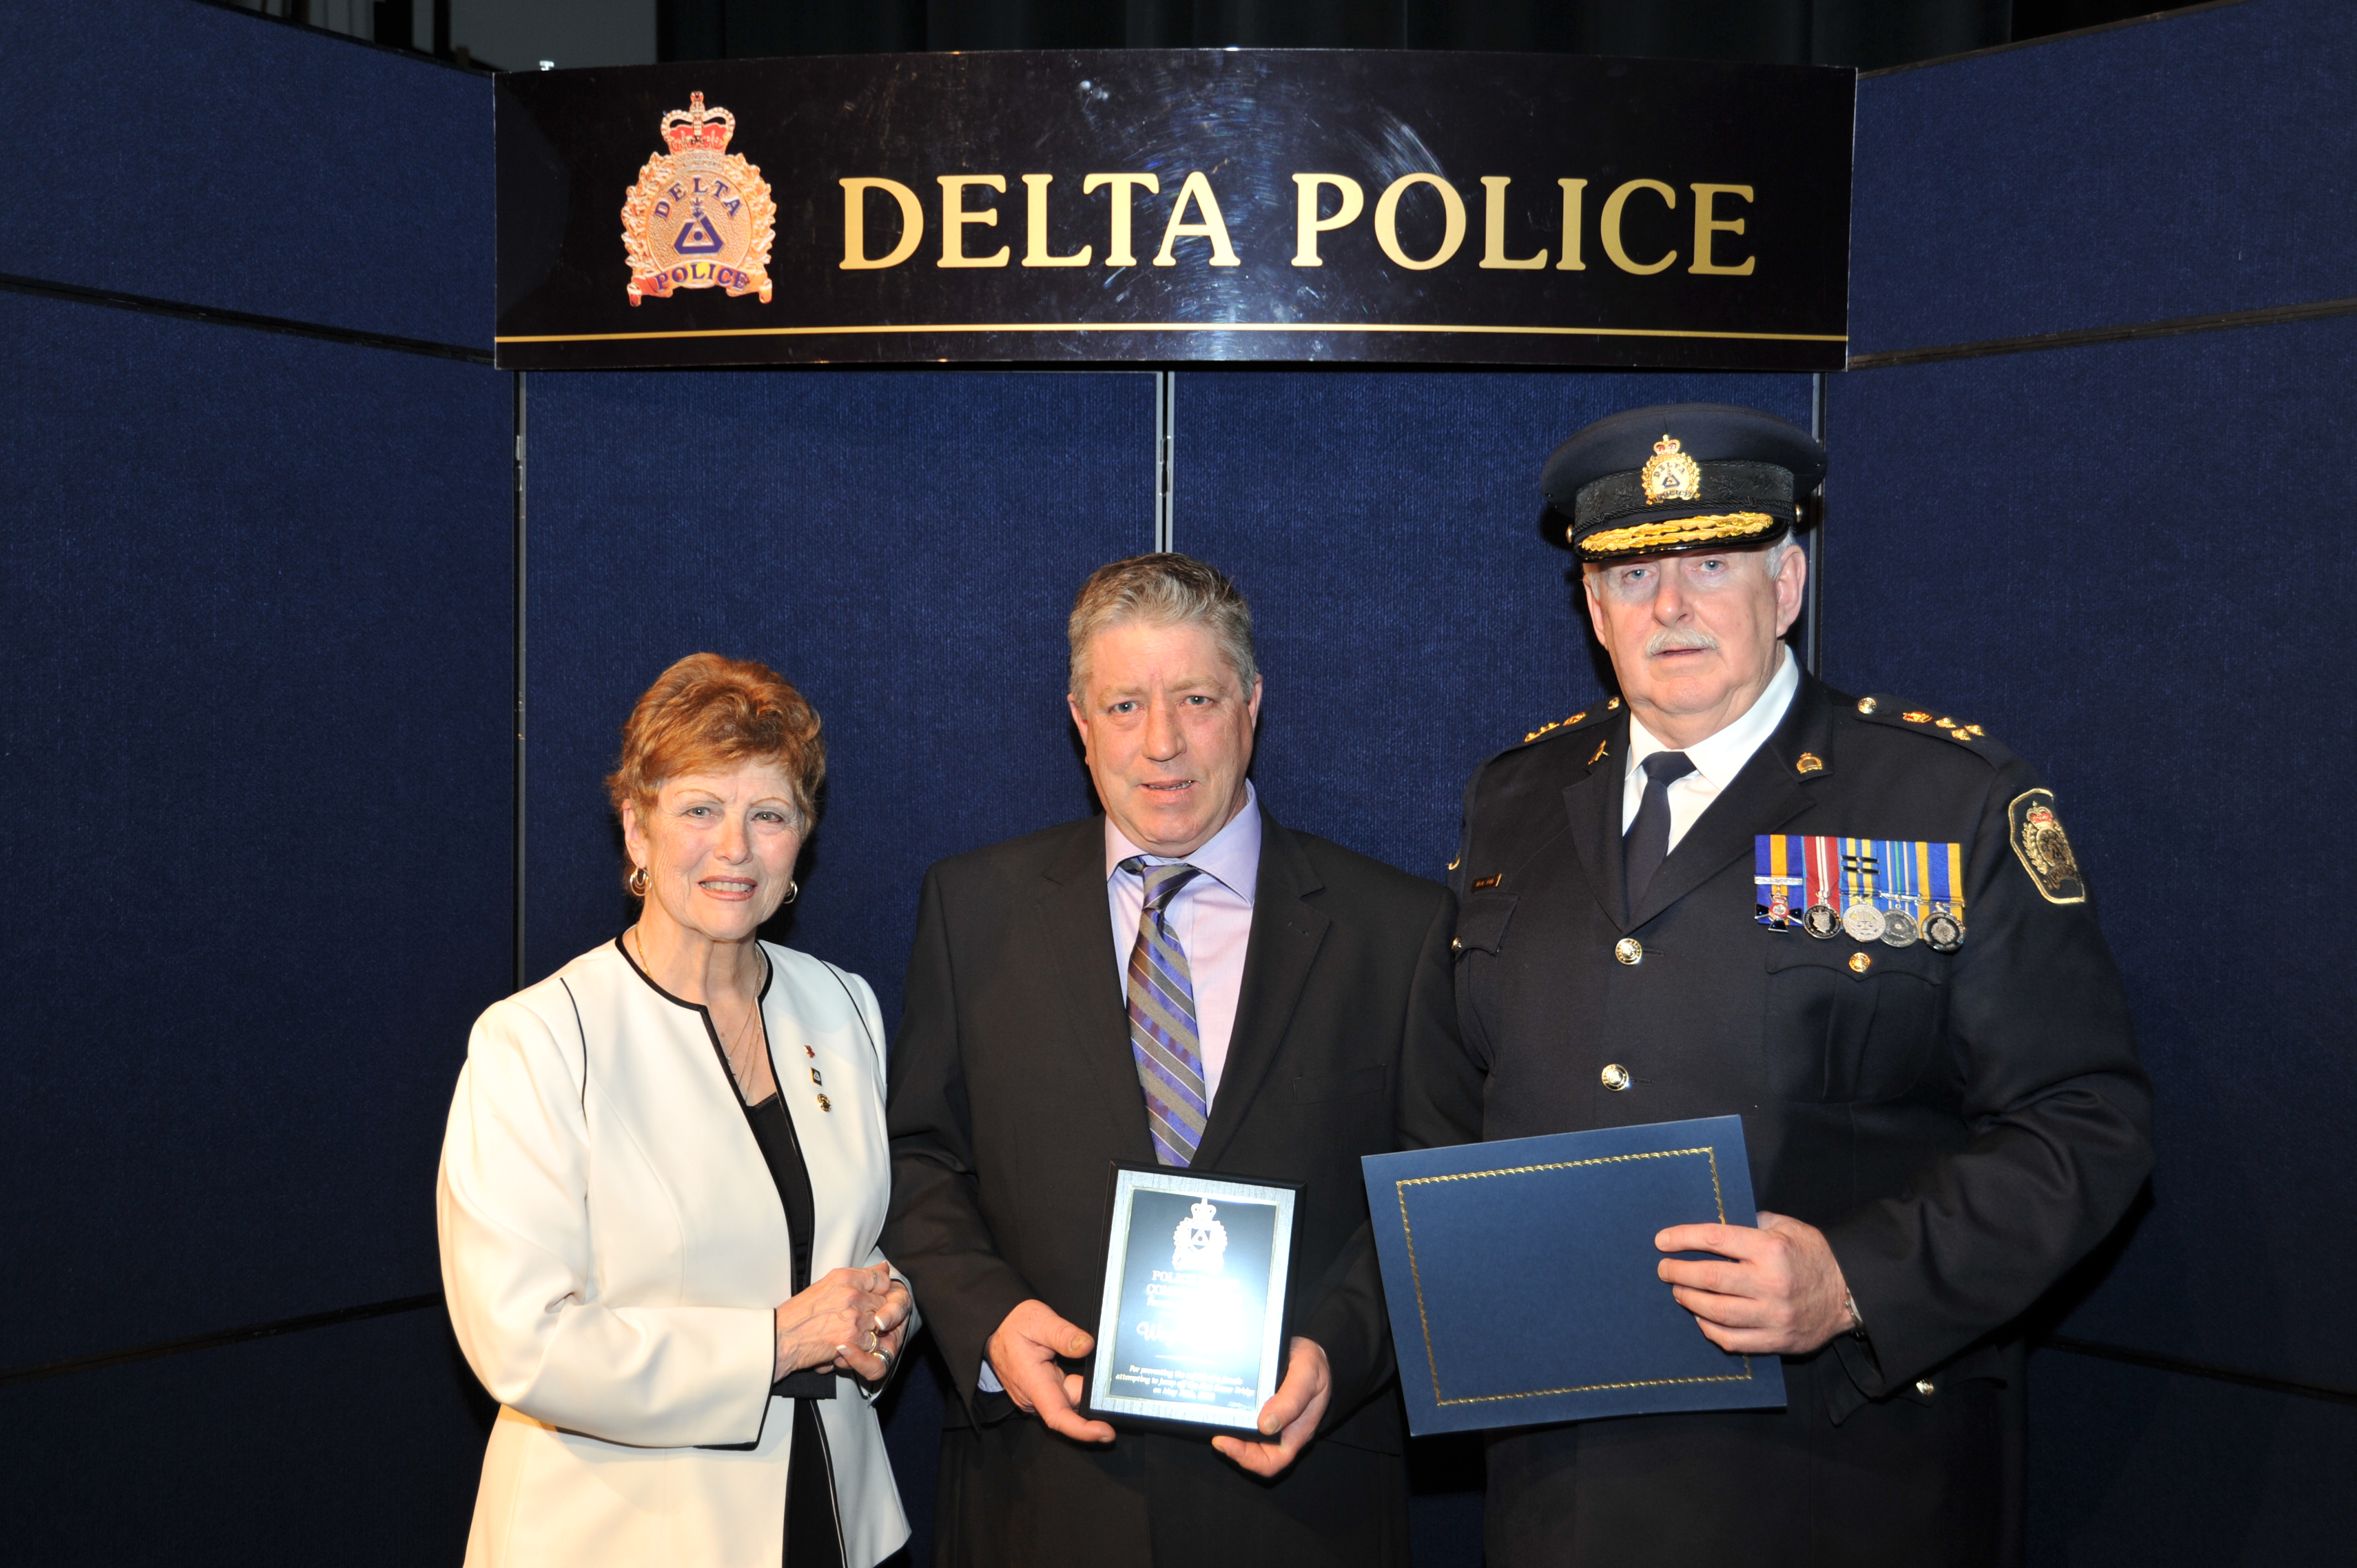 Delta Police Recognize Mainroad Employee at Annual Awards Ceremony